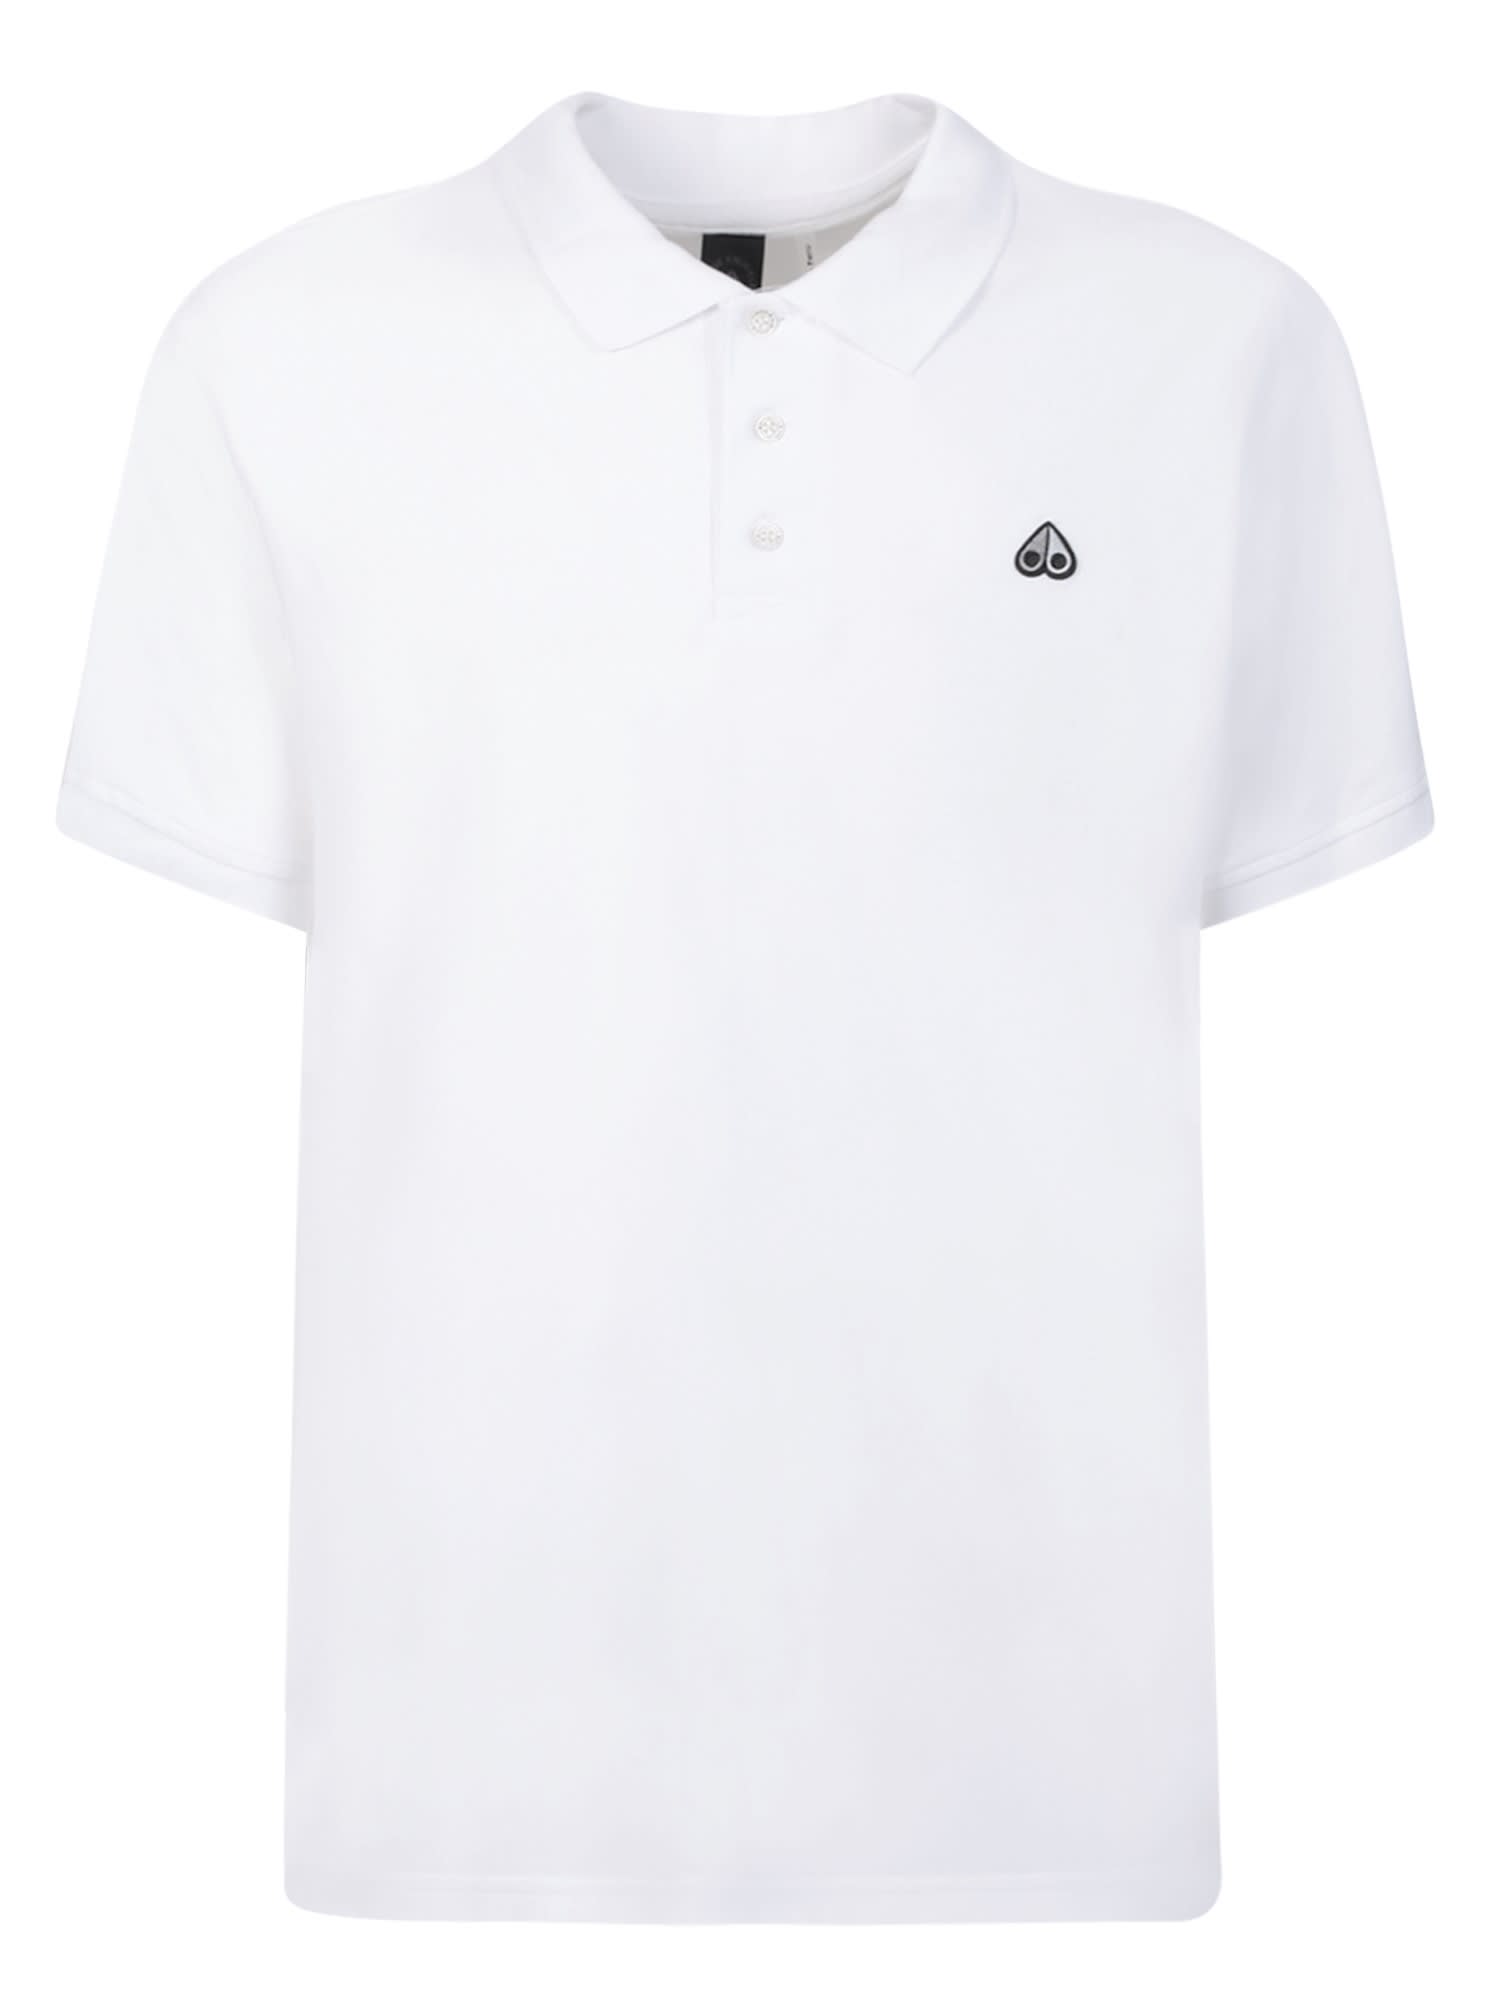 MOOSE KNUCKLES WHITE POLO SHIRT